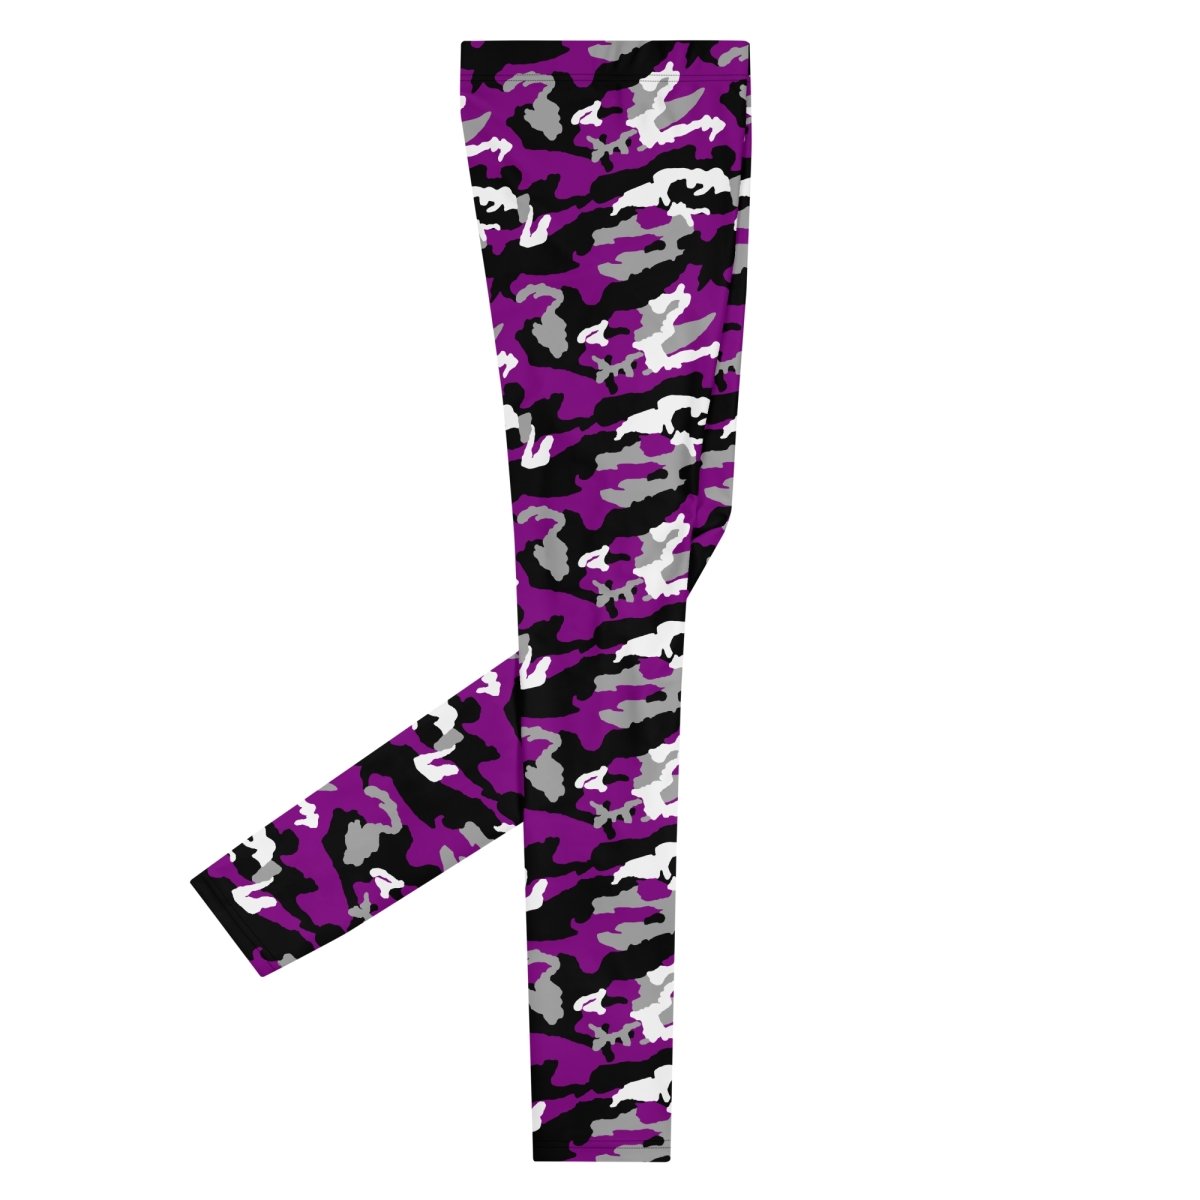 Asexual Camouflage Leggings w/Gusset - On Trend Shirts